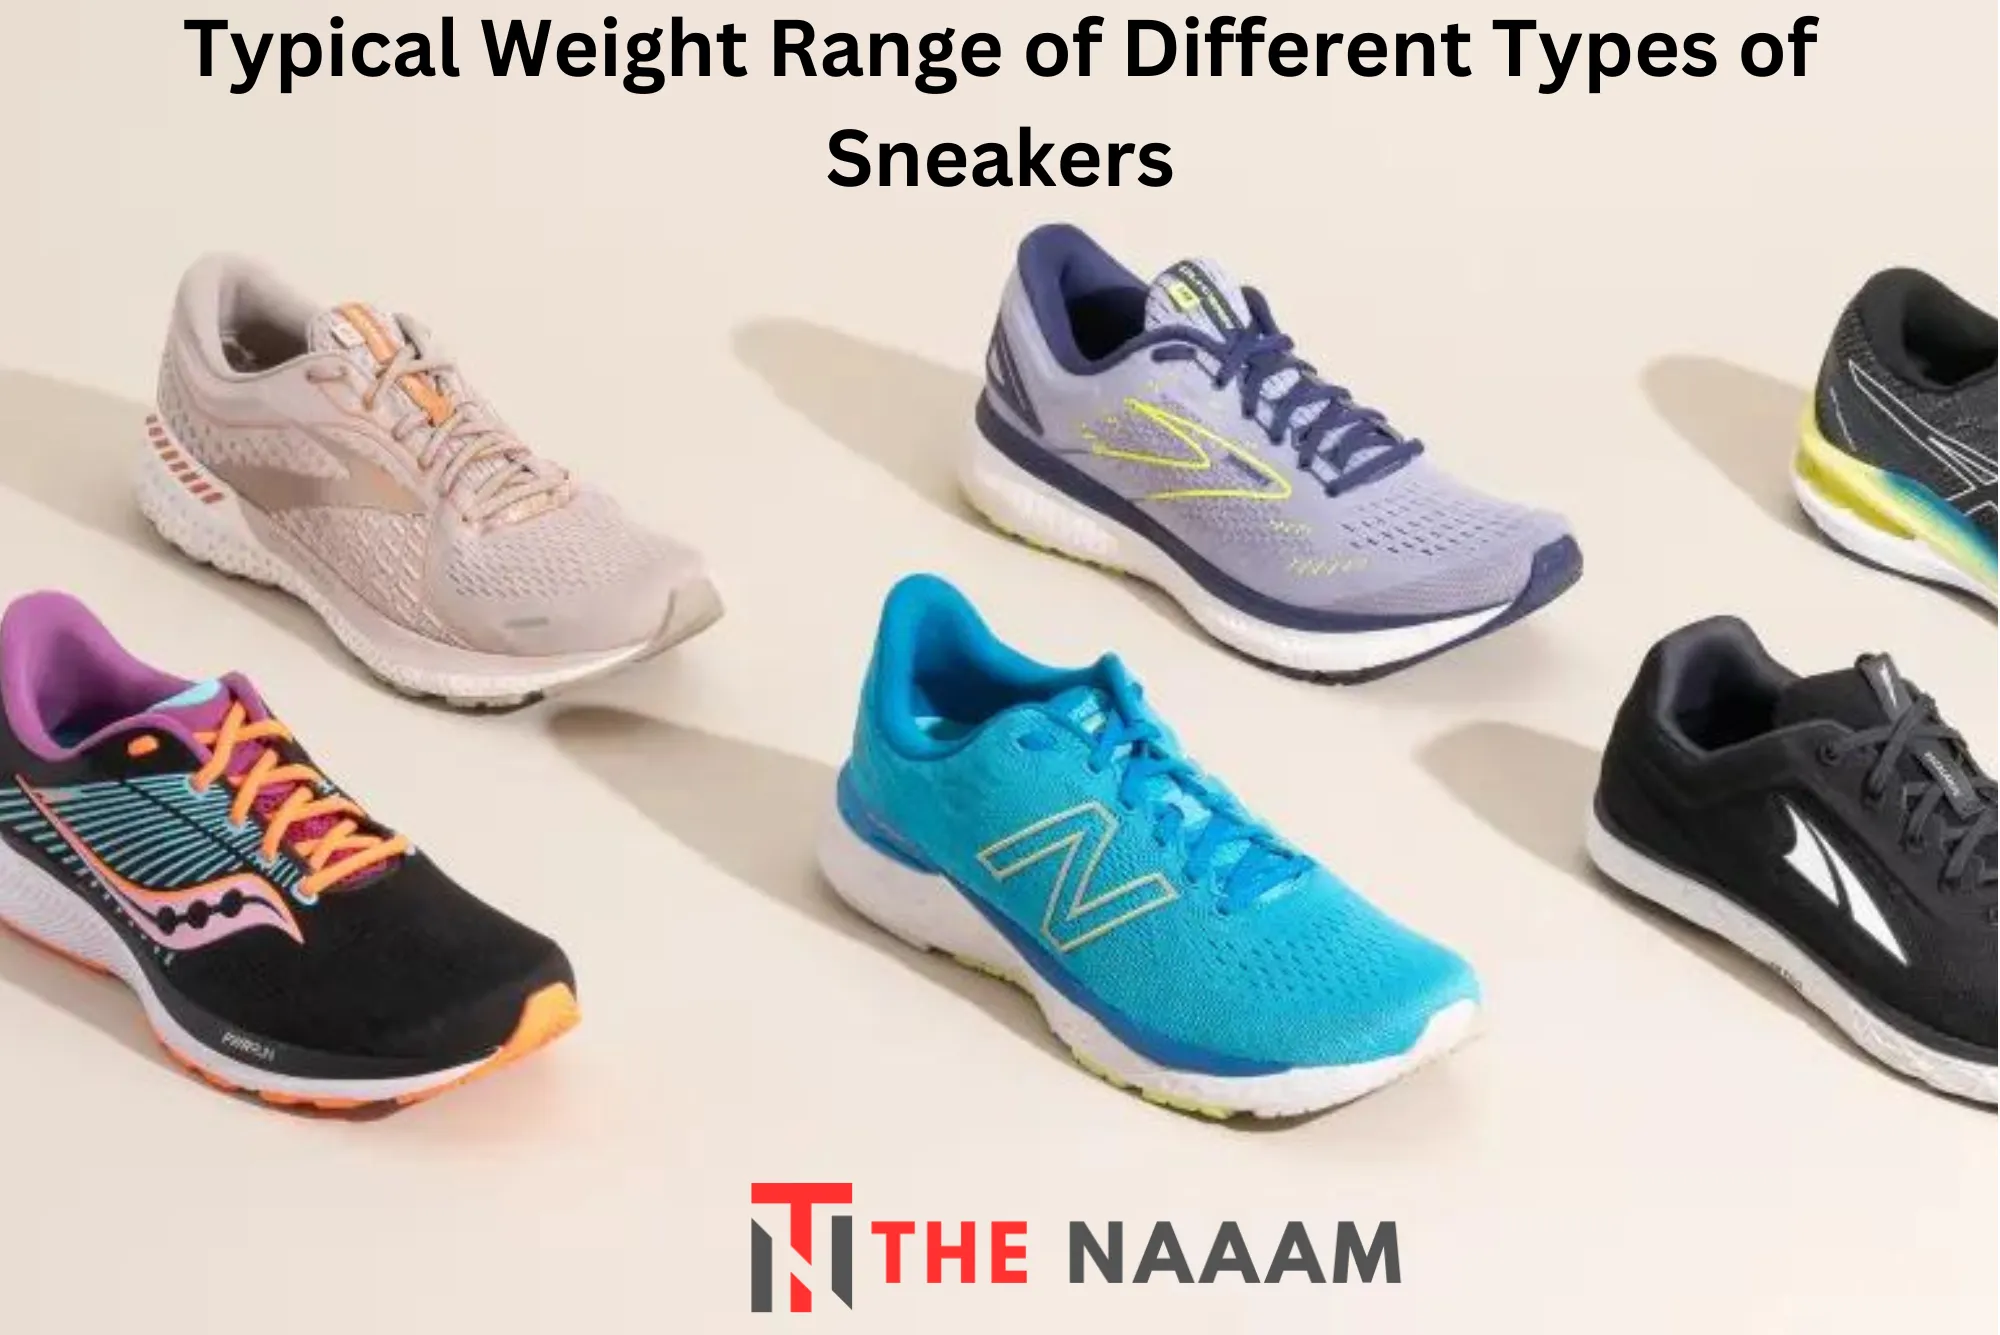 Typical Weight Range of Different Types of Sneakers